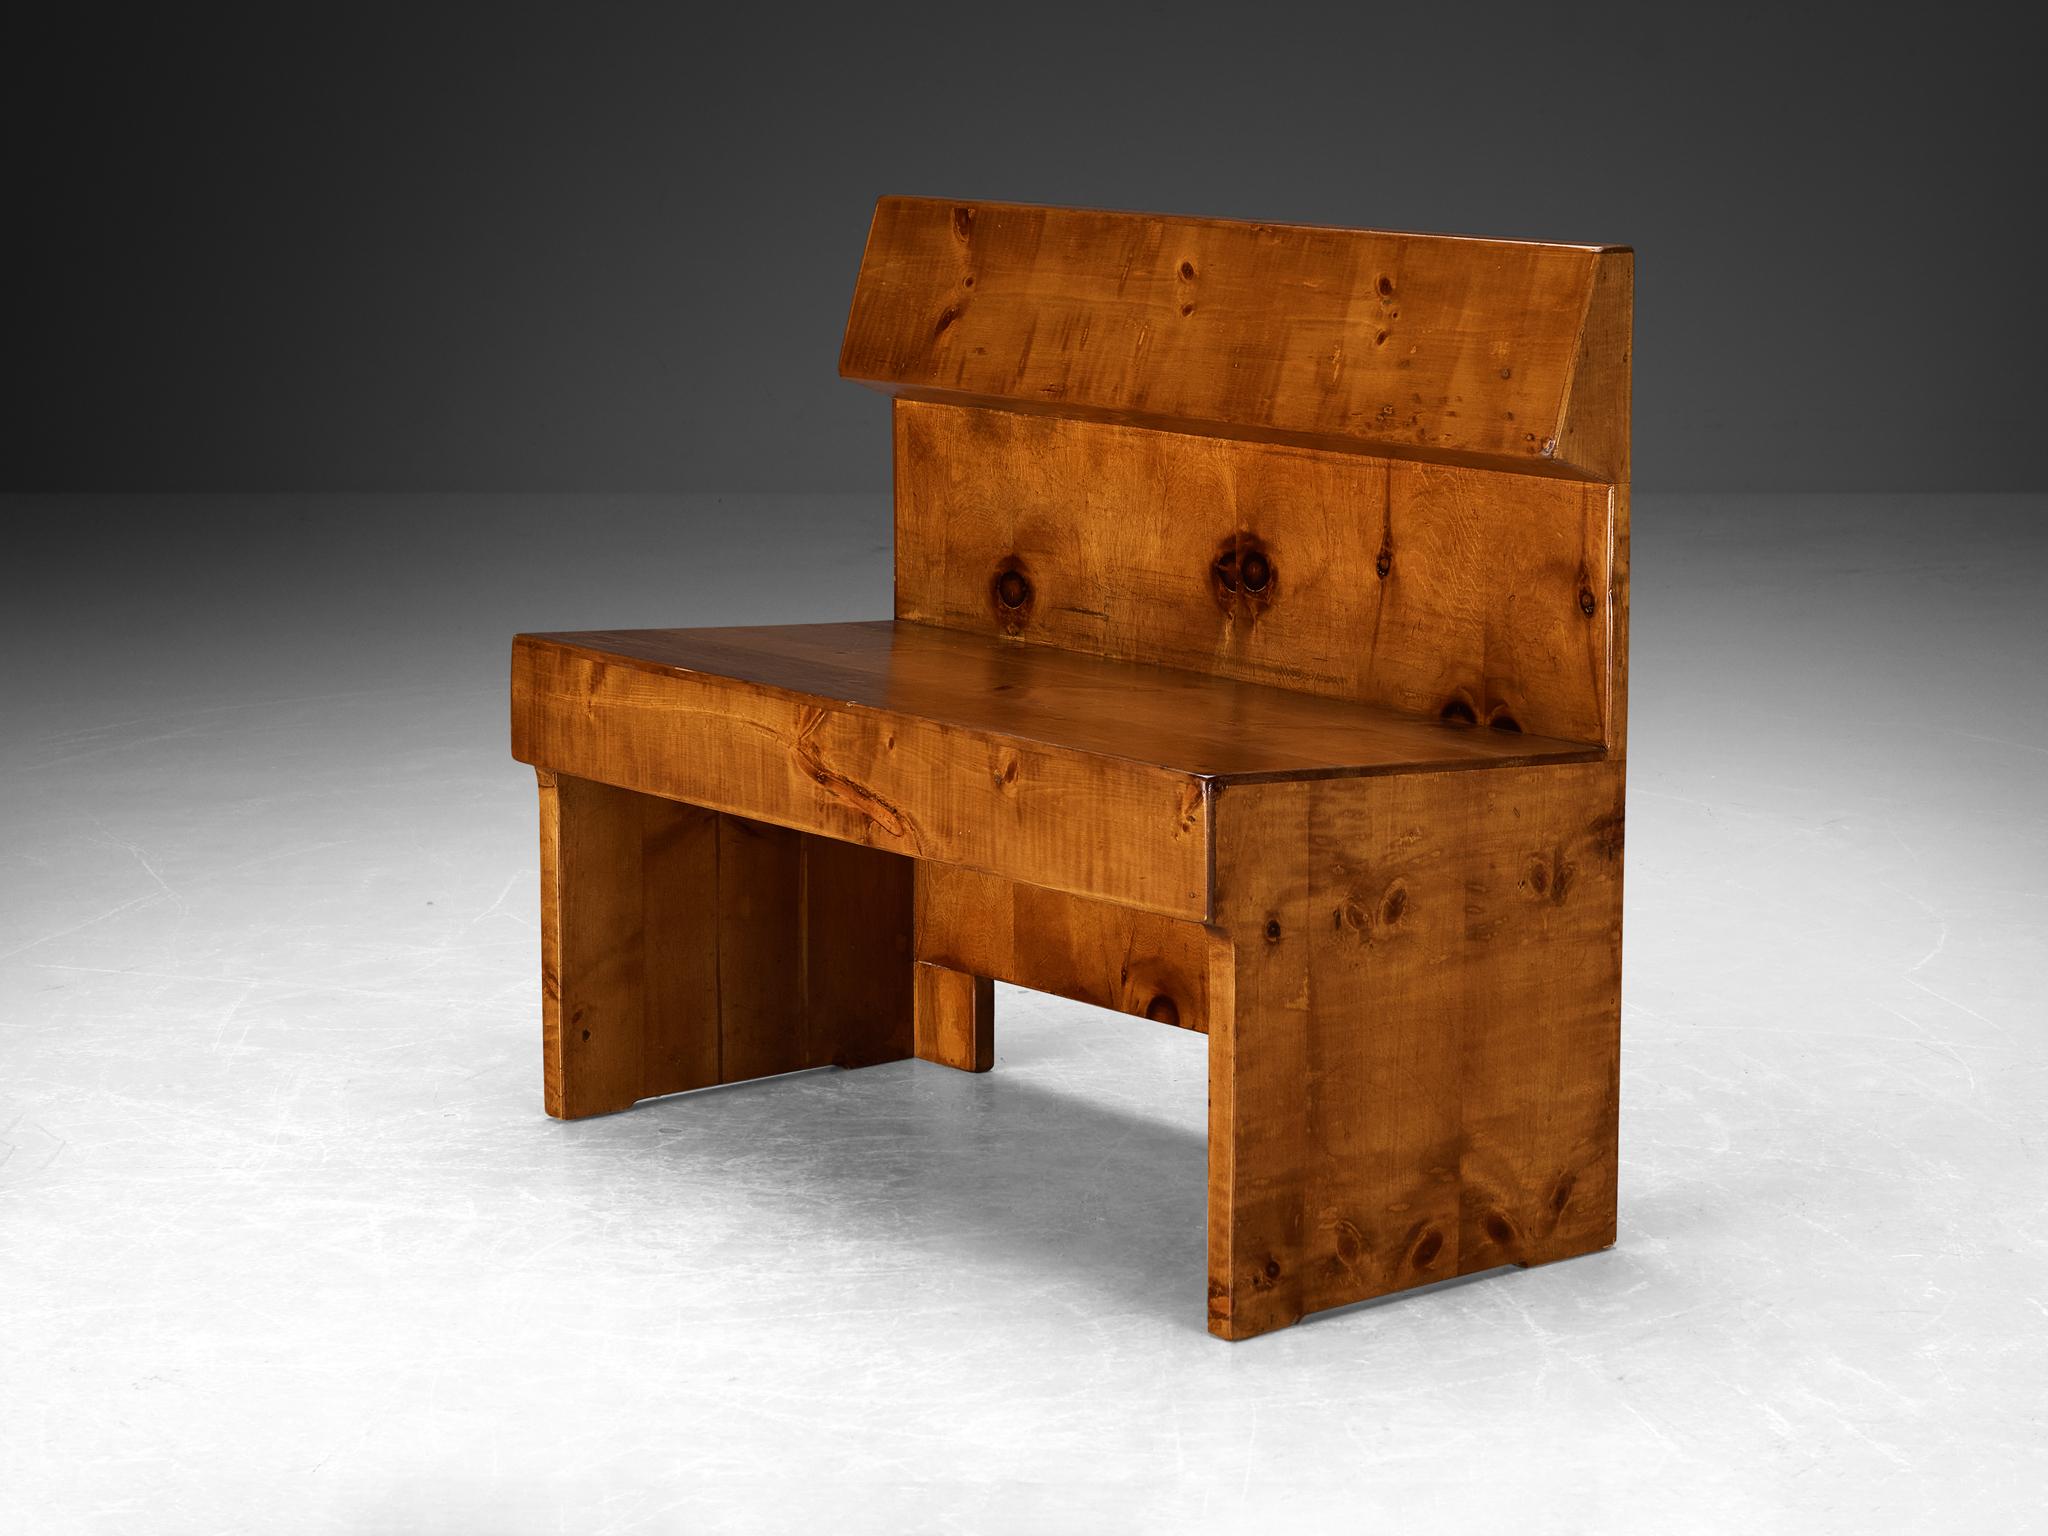 Giuseppe Rivadossi bench, pine, wood, Italy, 1970s

In the world of great design, this bench made by Giuseppe Rivadossi emerges as an exemplar of bespoke craftsmanship, crafted for a private client and made by Rivadossi in Italy in the 1970s.

This